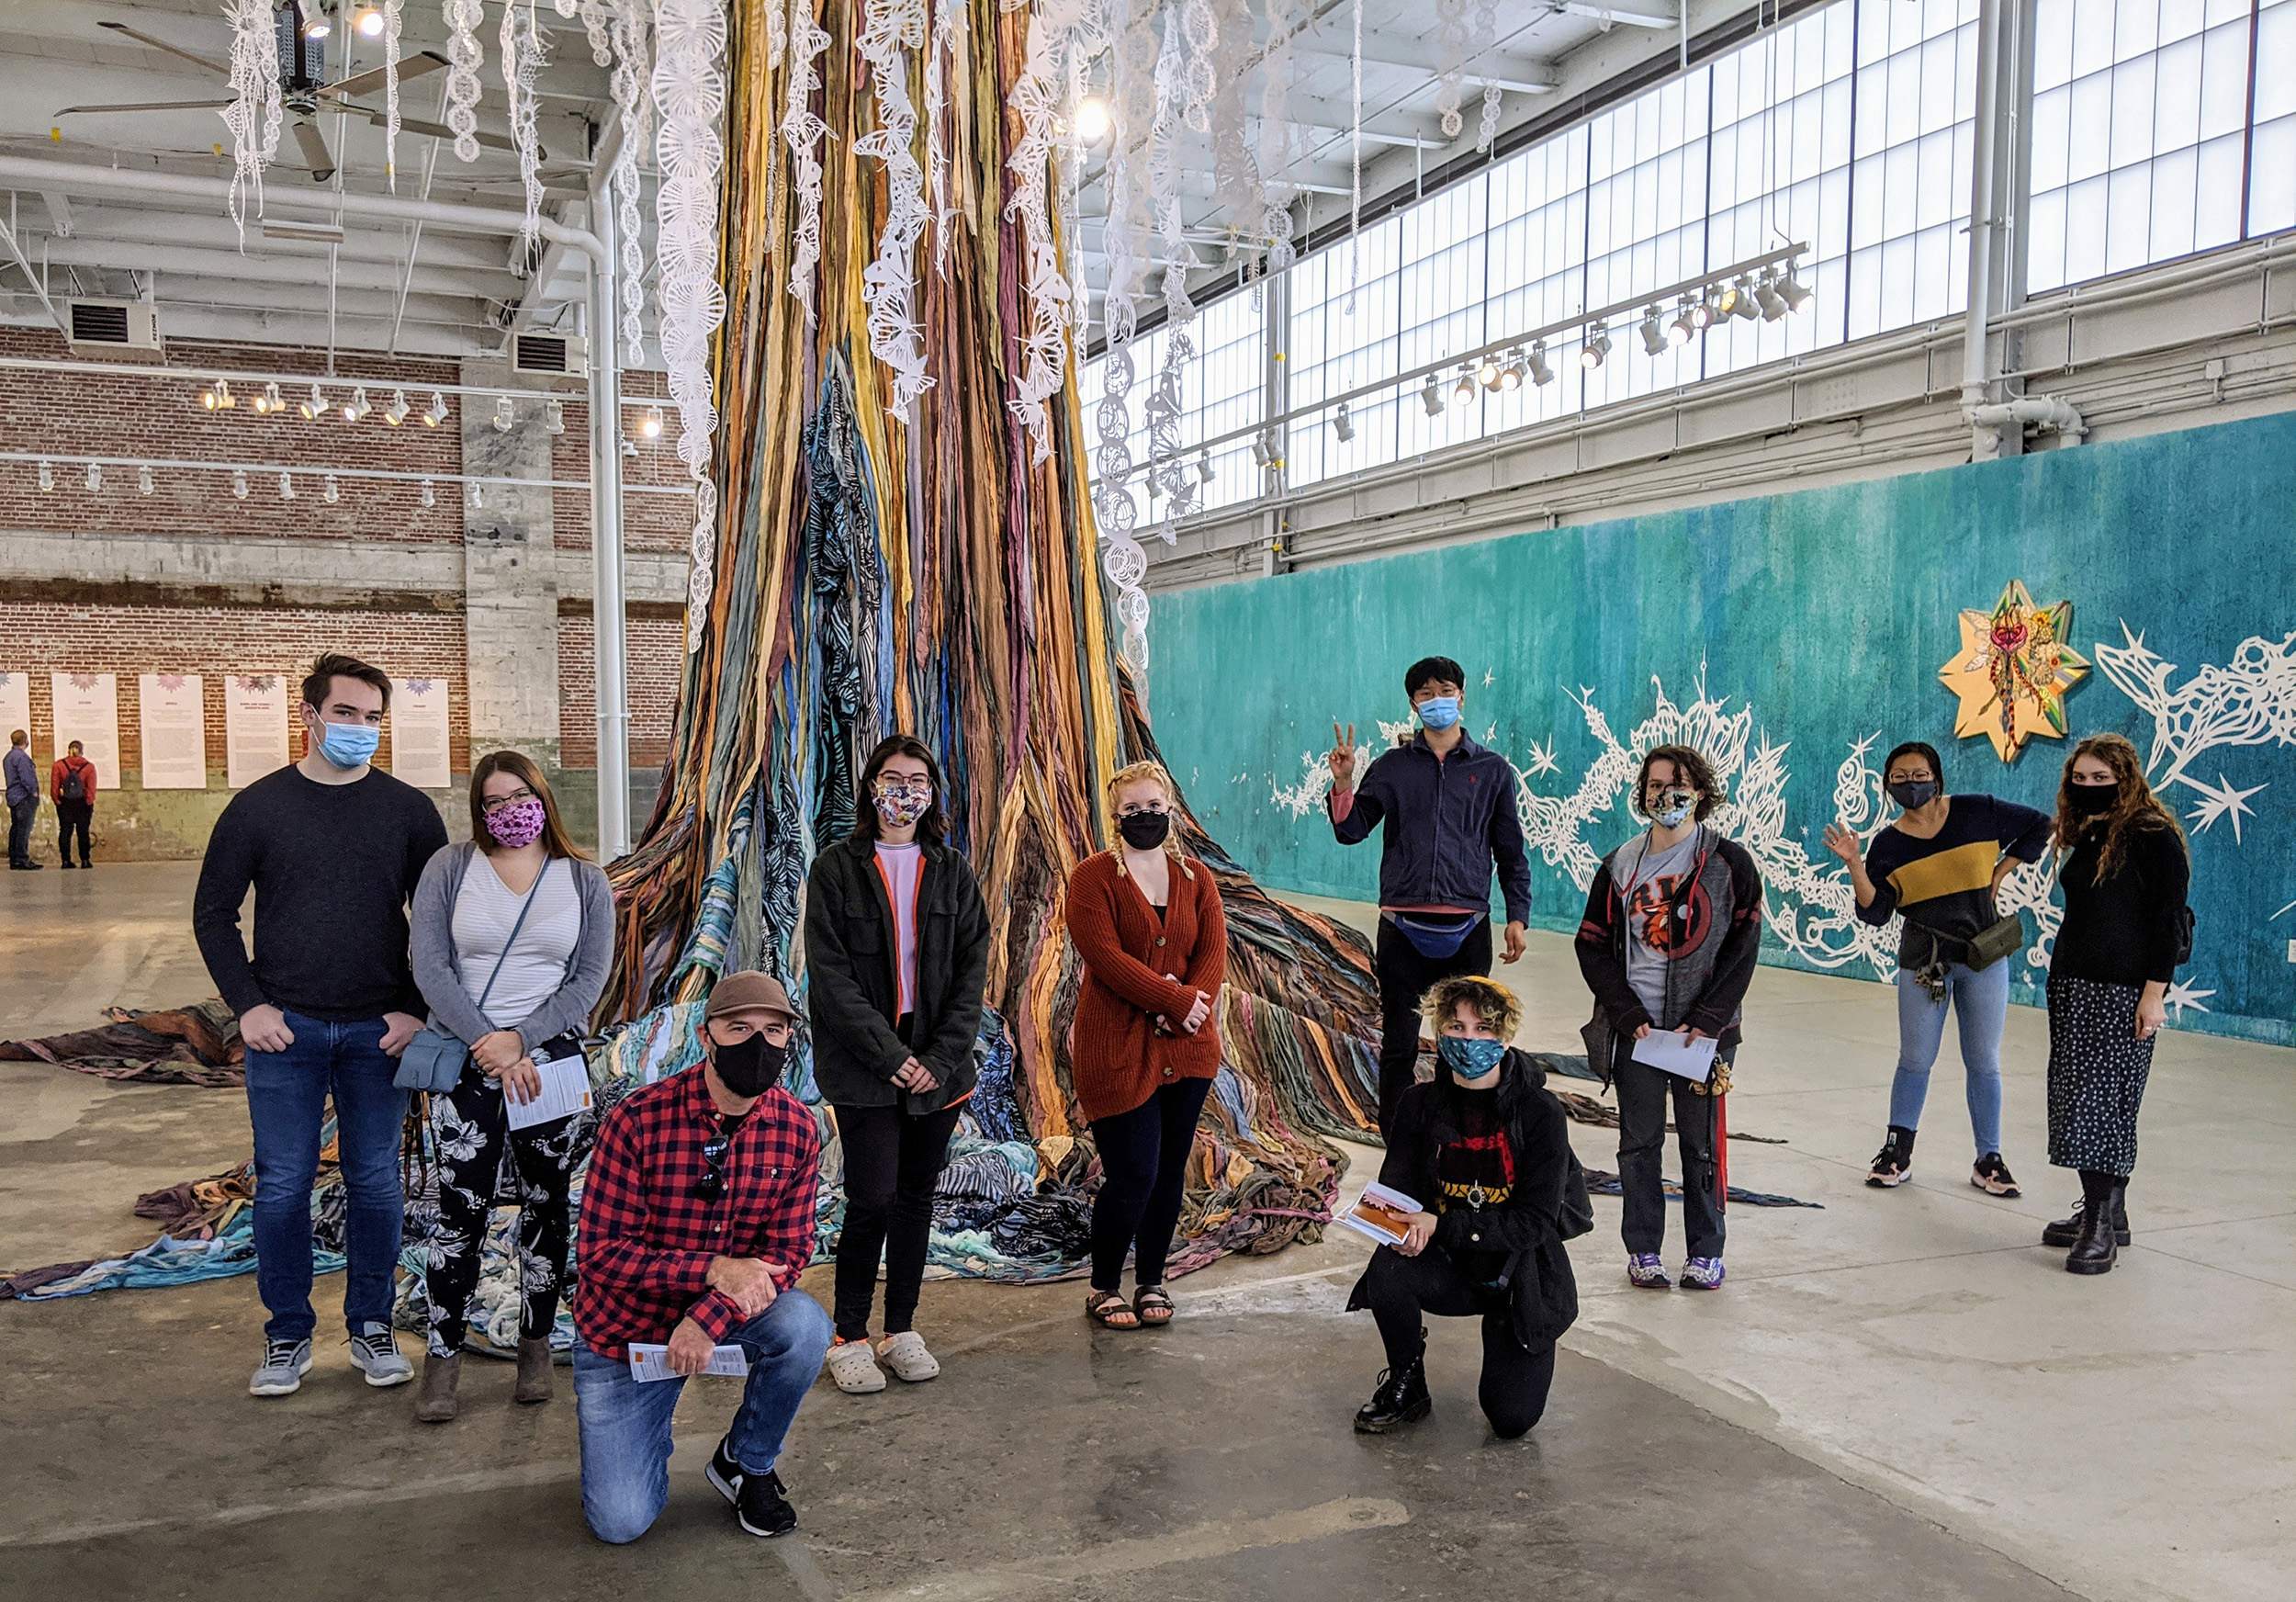 A group of students gather around a large sculpture that resembles a tree.